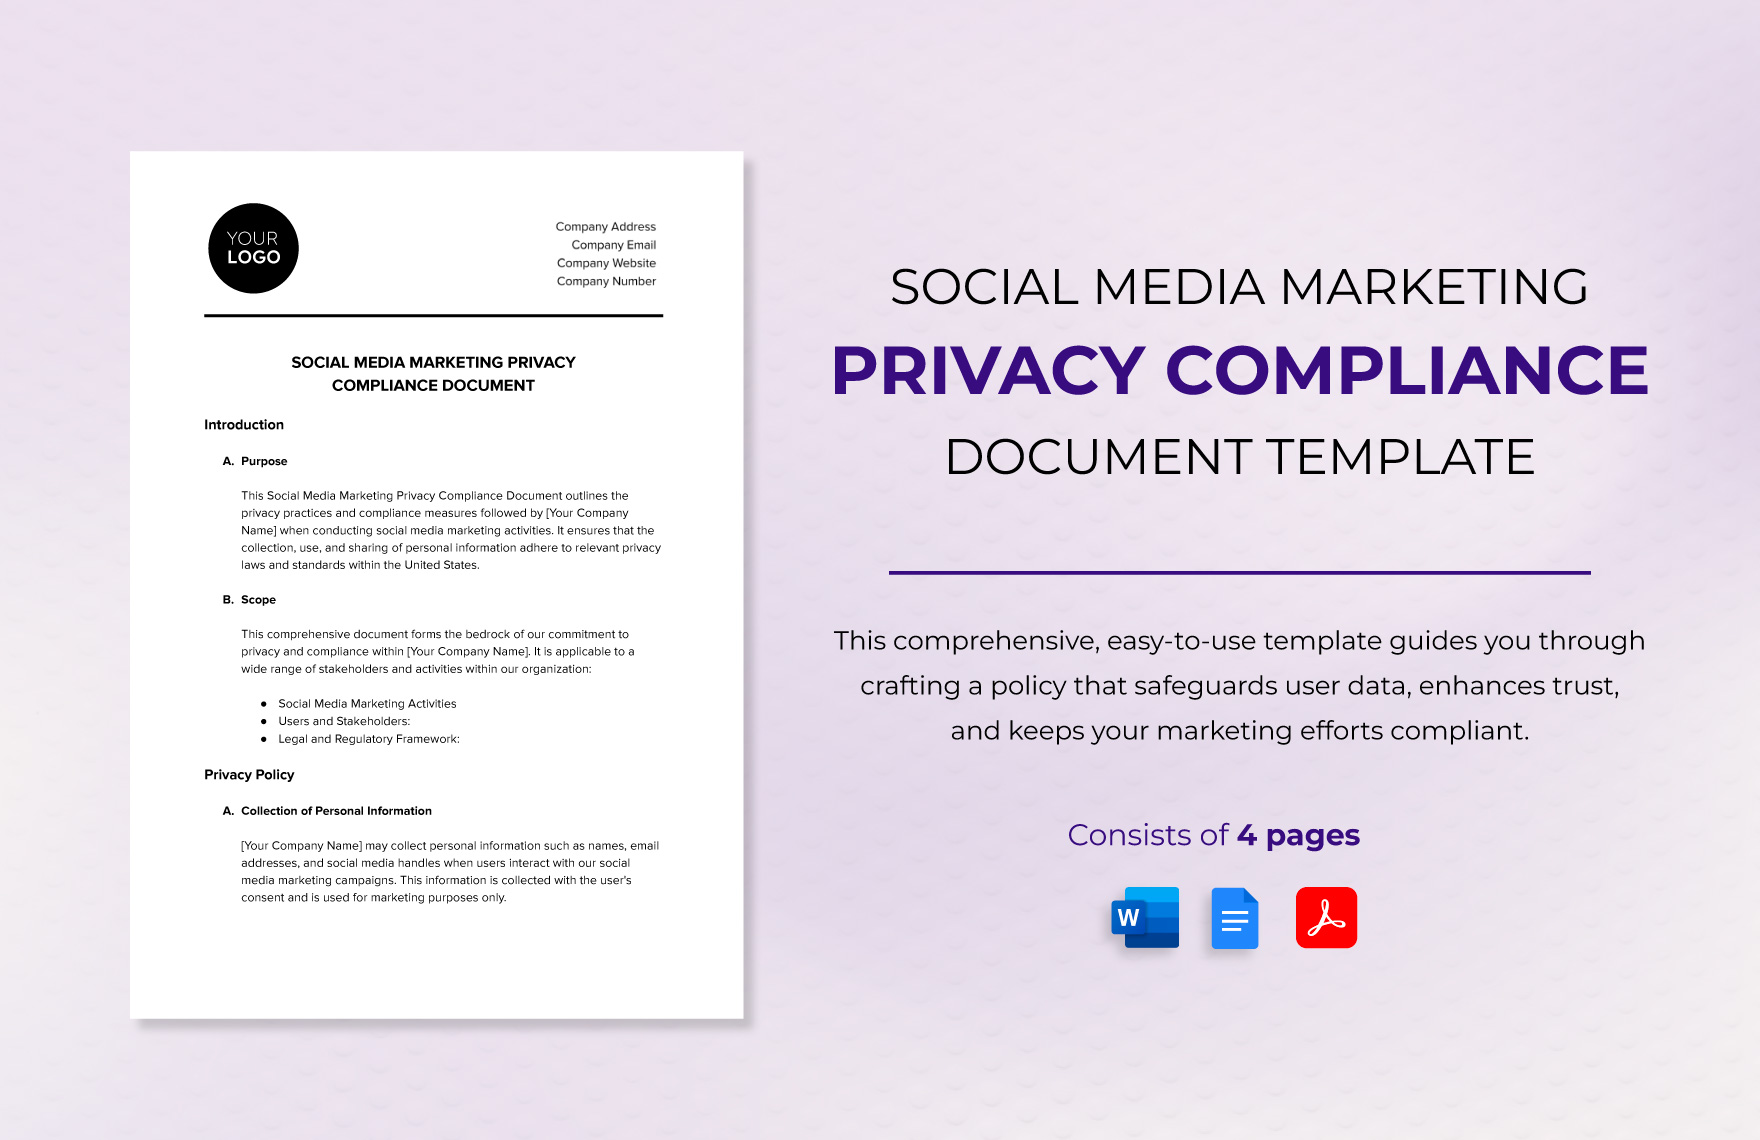 Social Media Marketing Privacy Compliance Document Template in Word, Google Docs, PDF